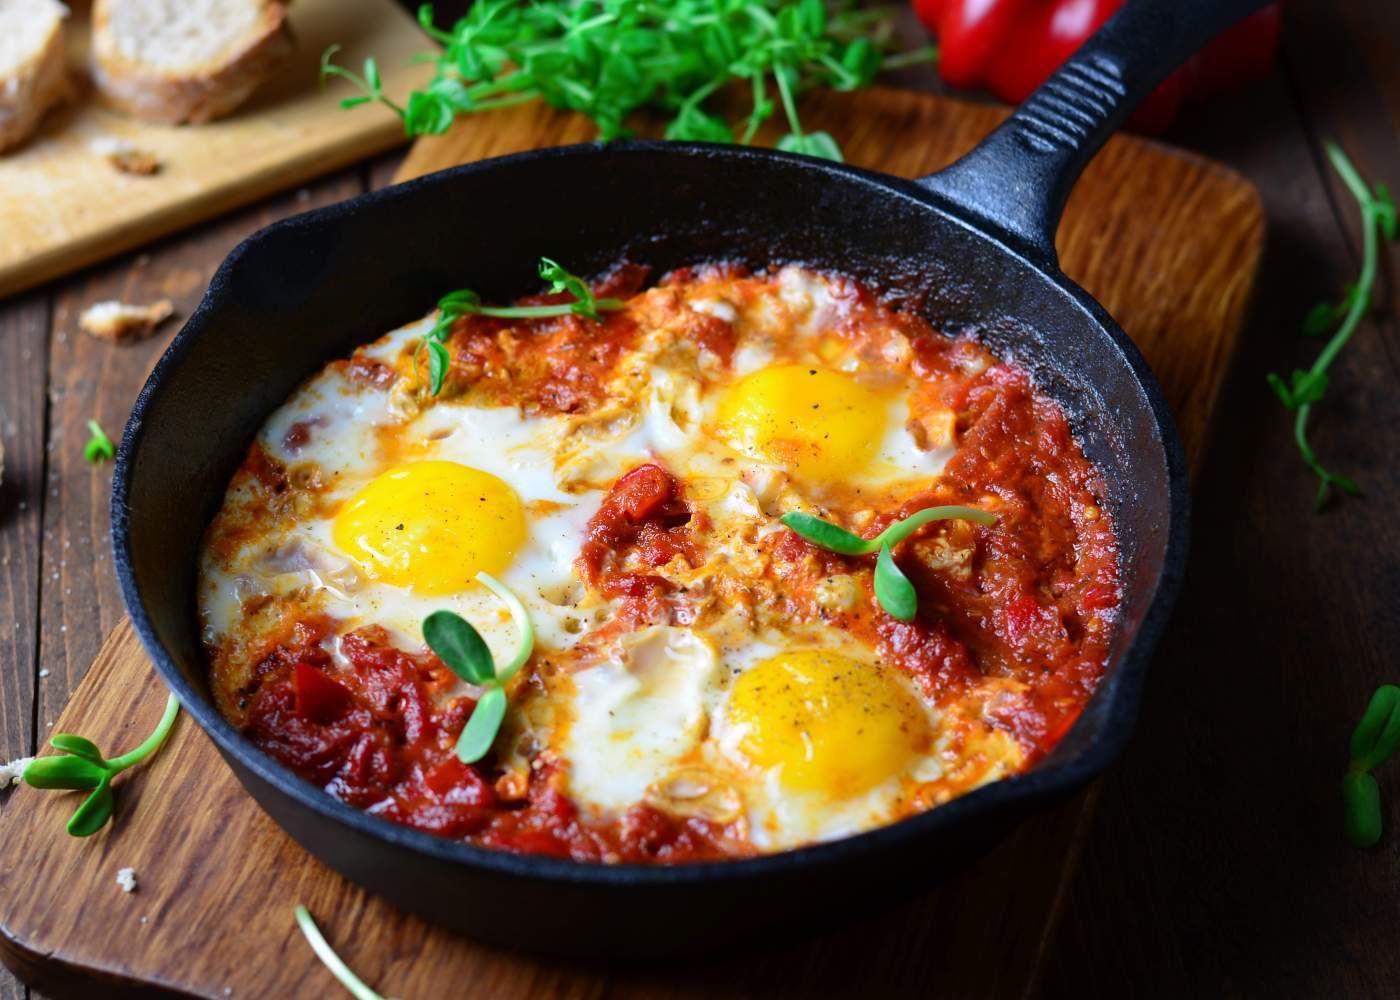 Dinner egg recipe with eggs baked in tomato sauce and covered with cheese.